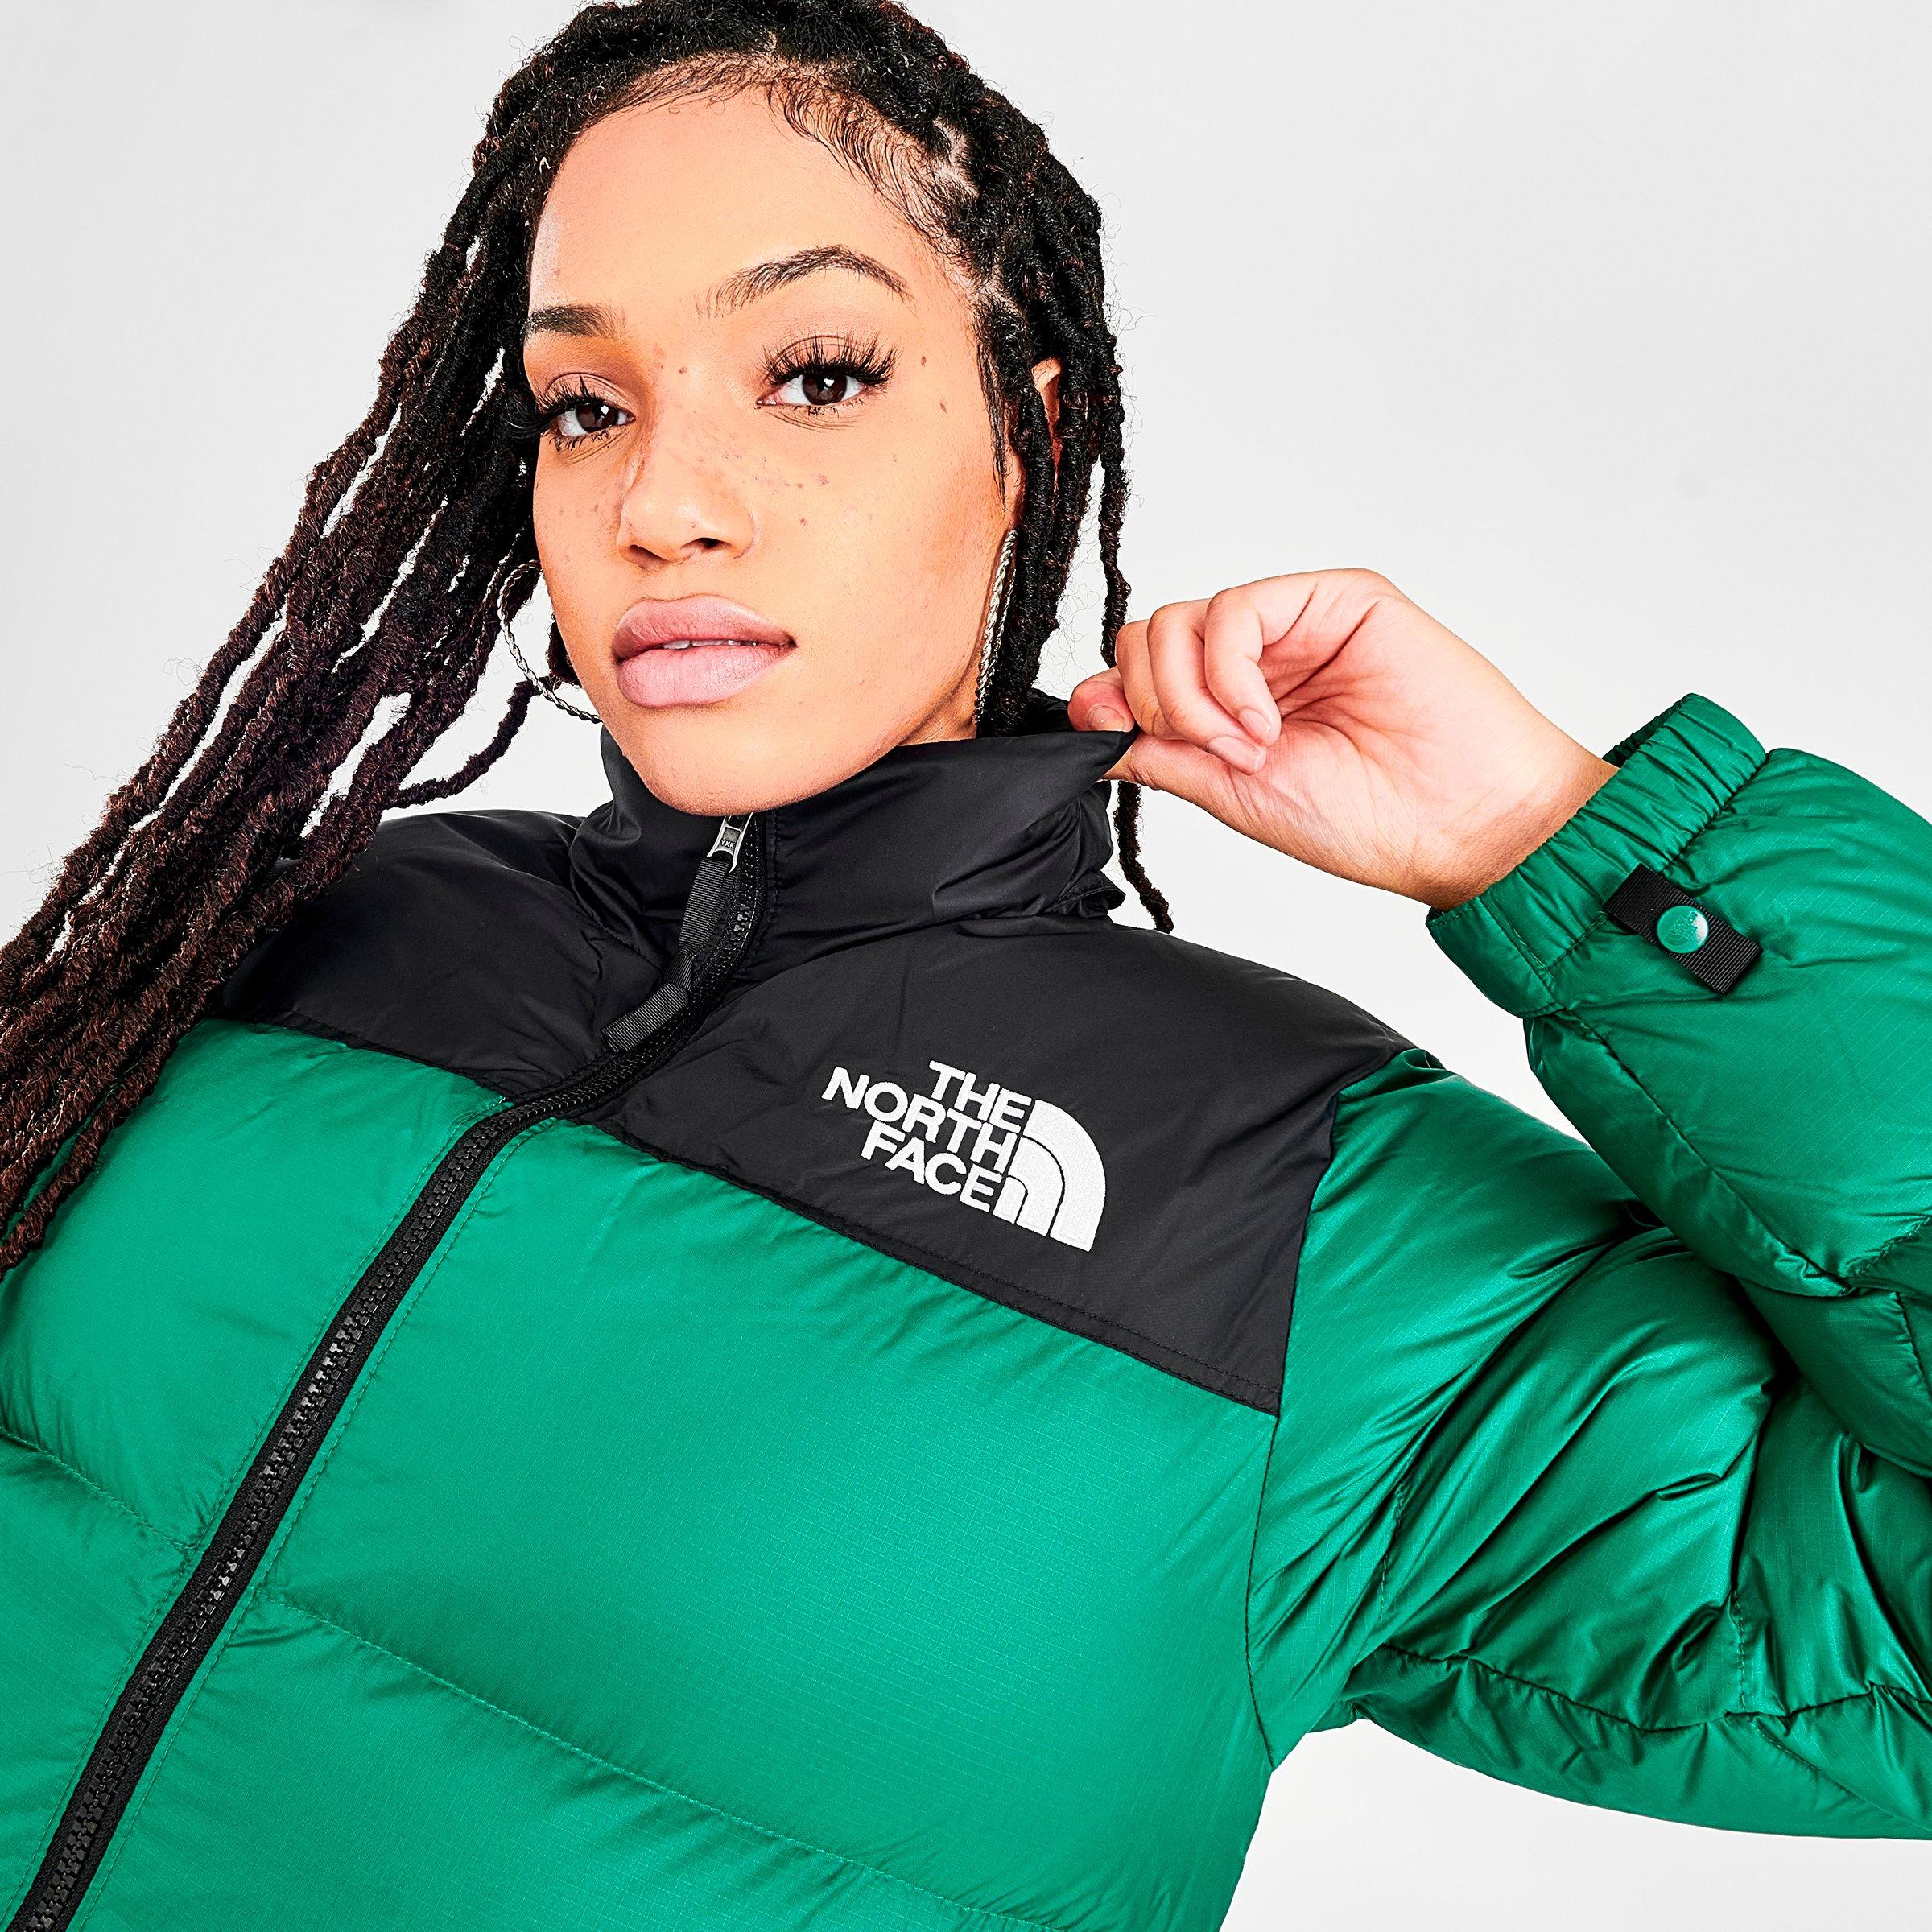 north face 1996 green